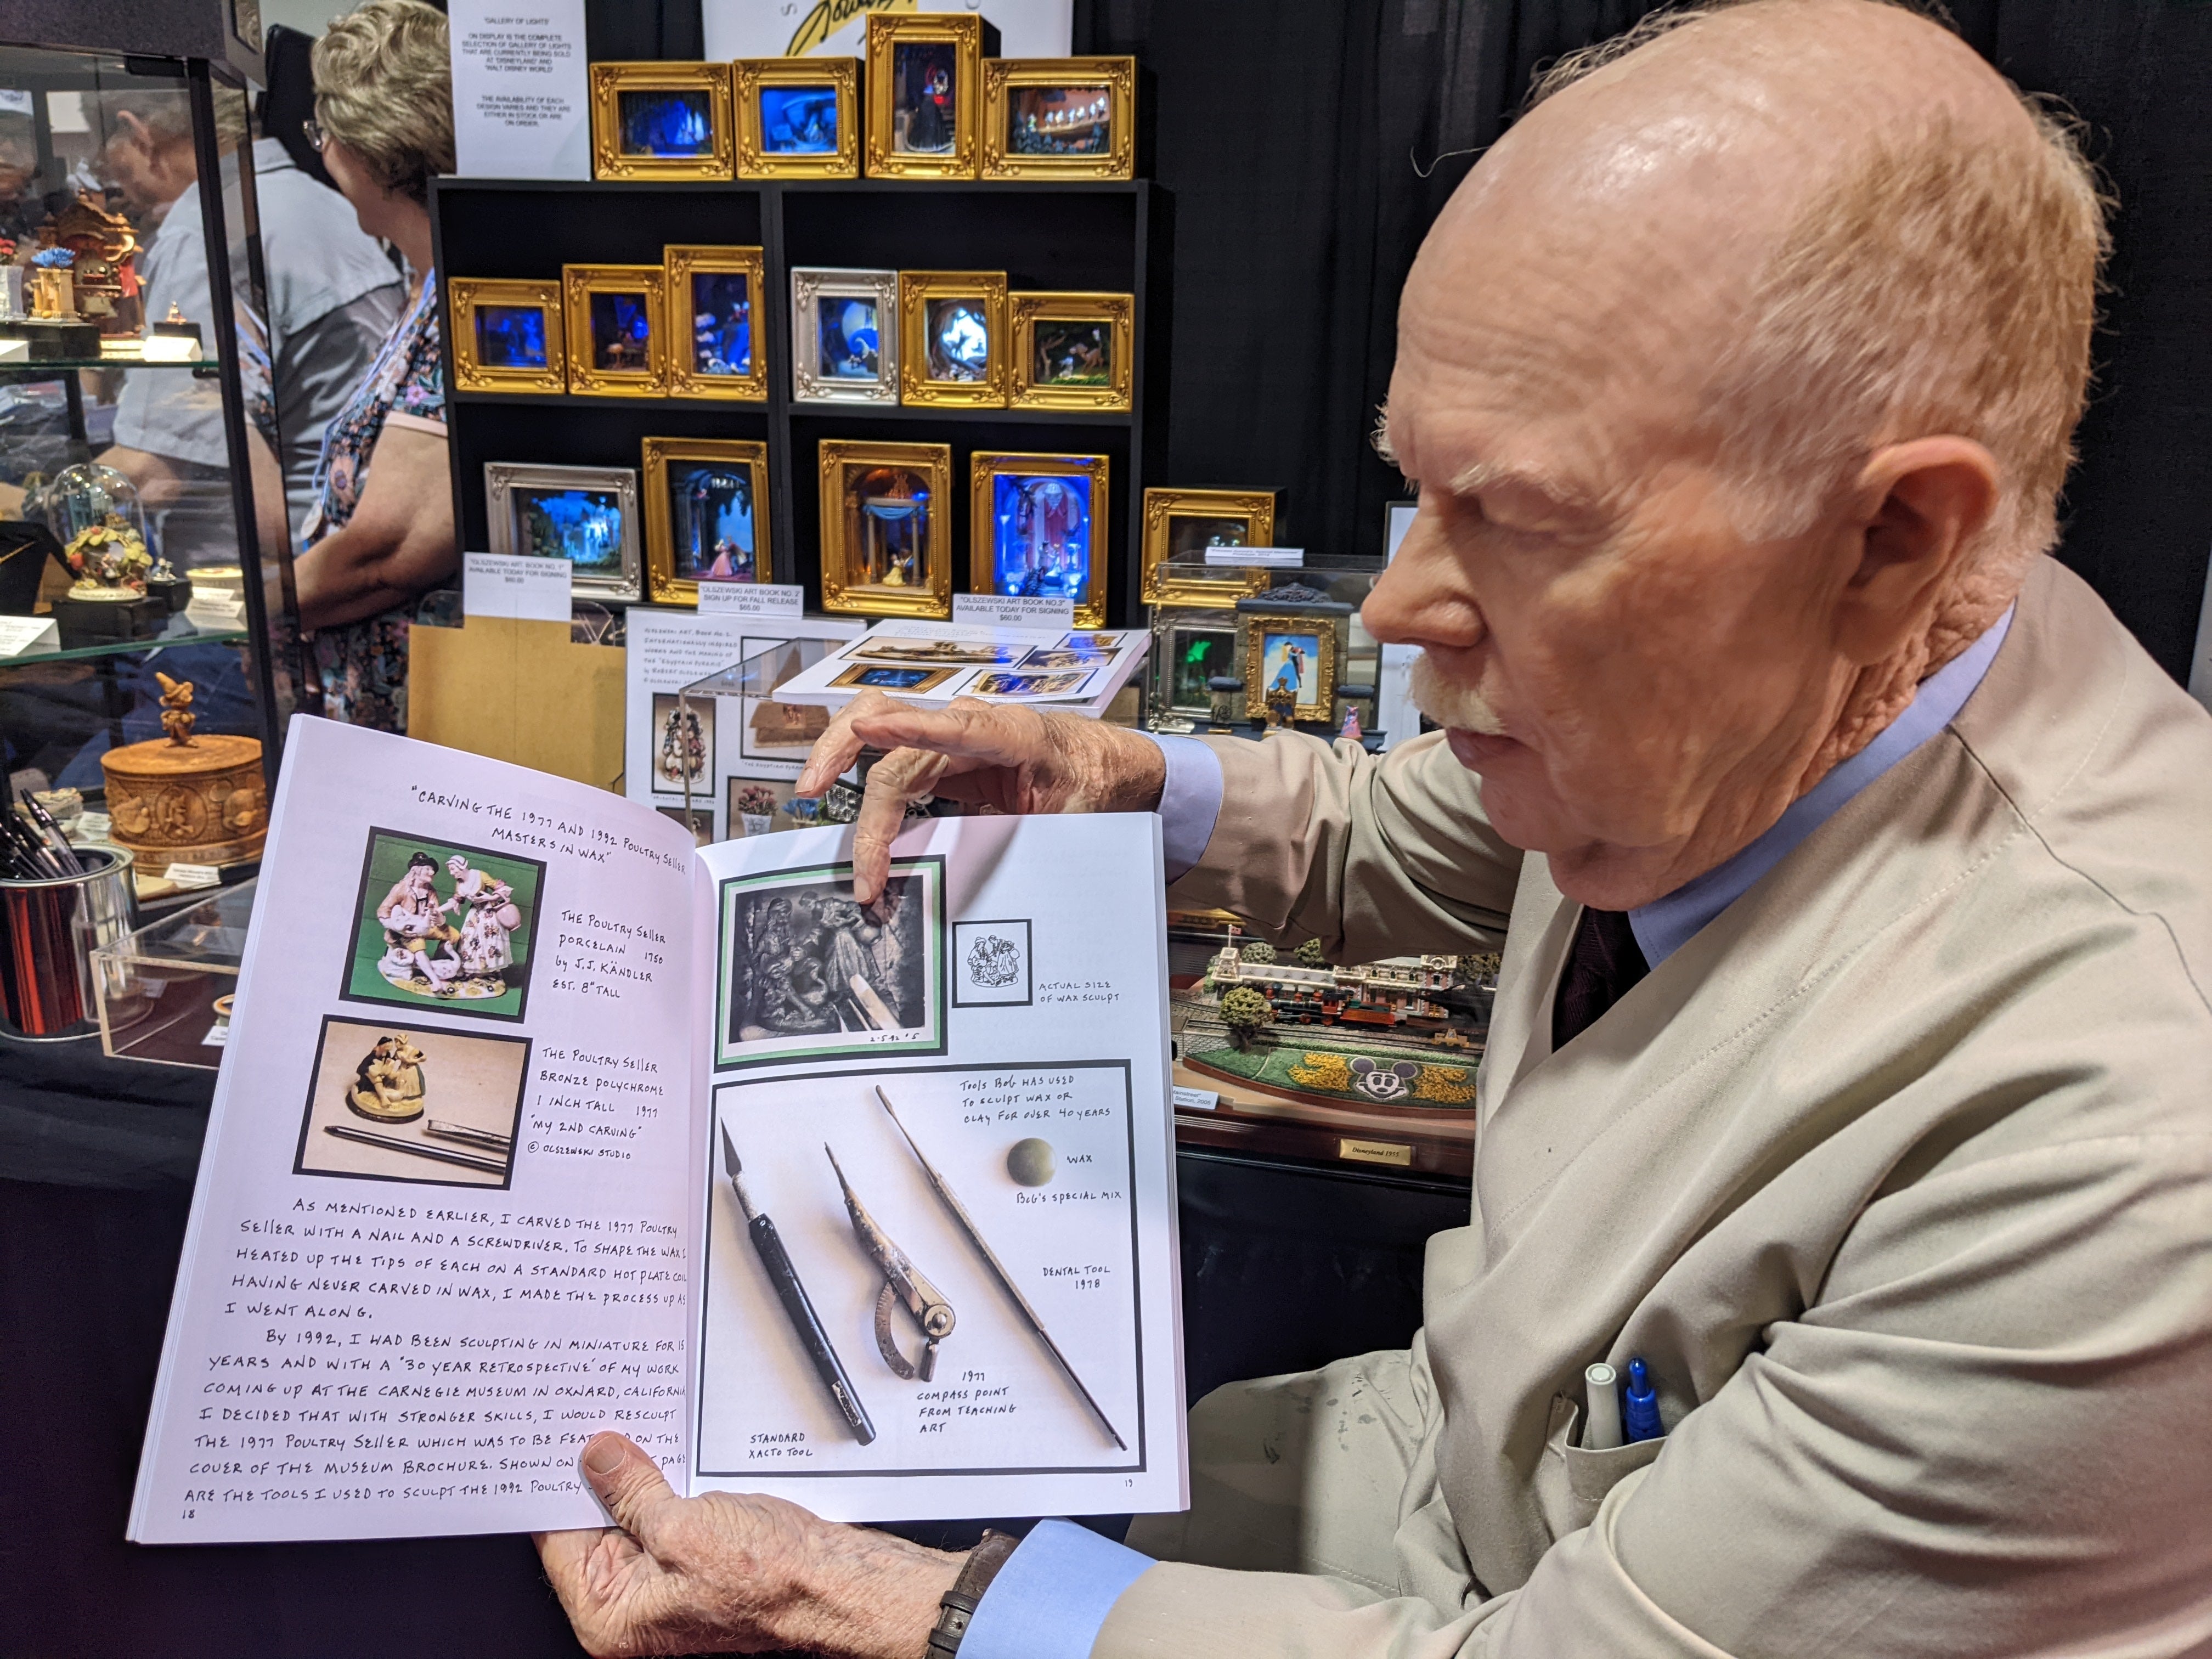 Bob Olszewski pointing out the tools he used in his book